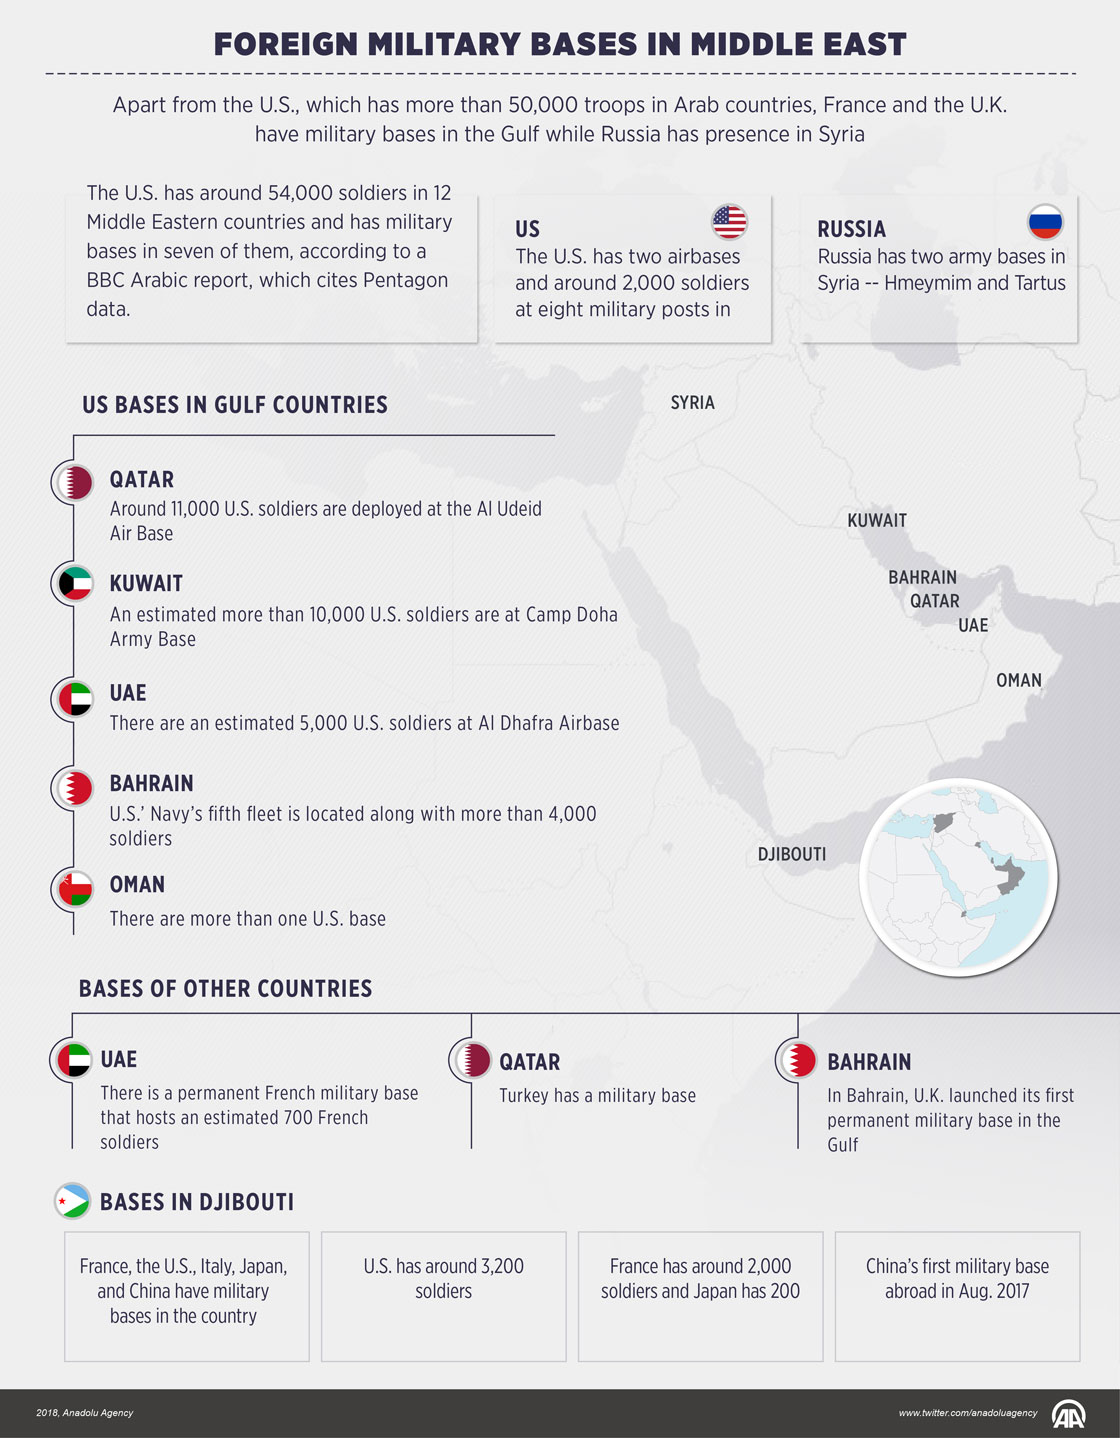 Foreign military bases in Middle East